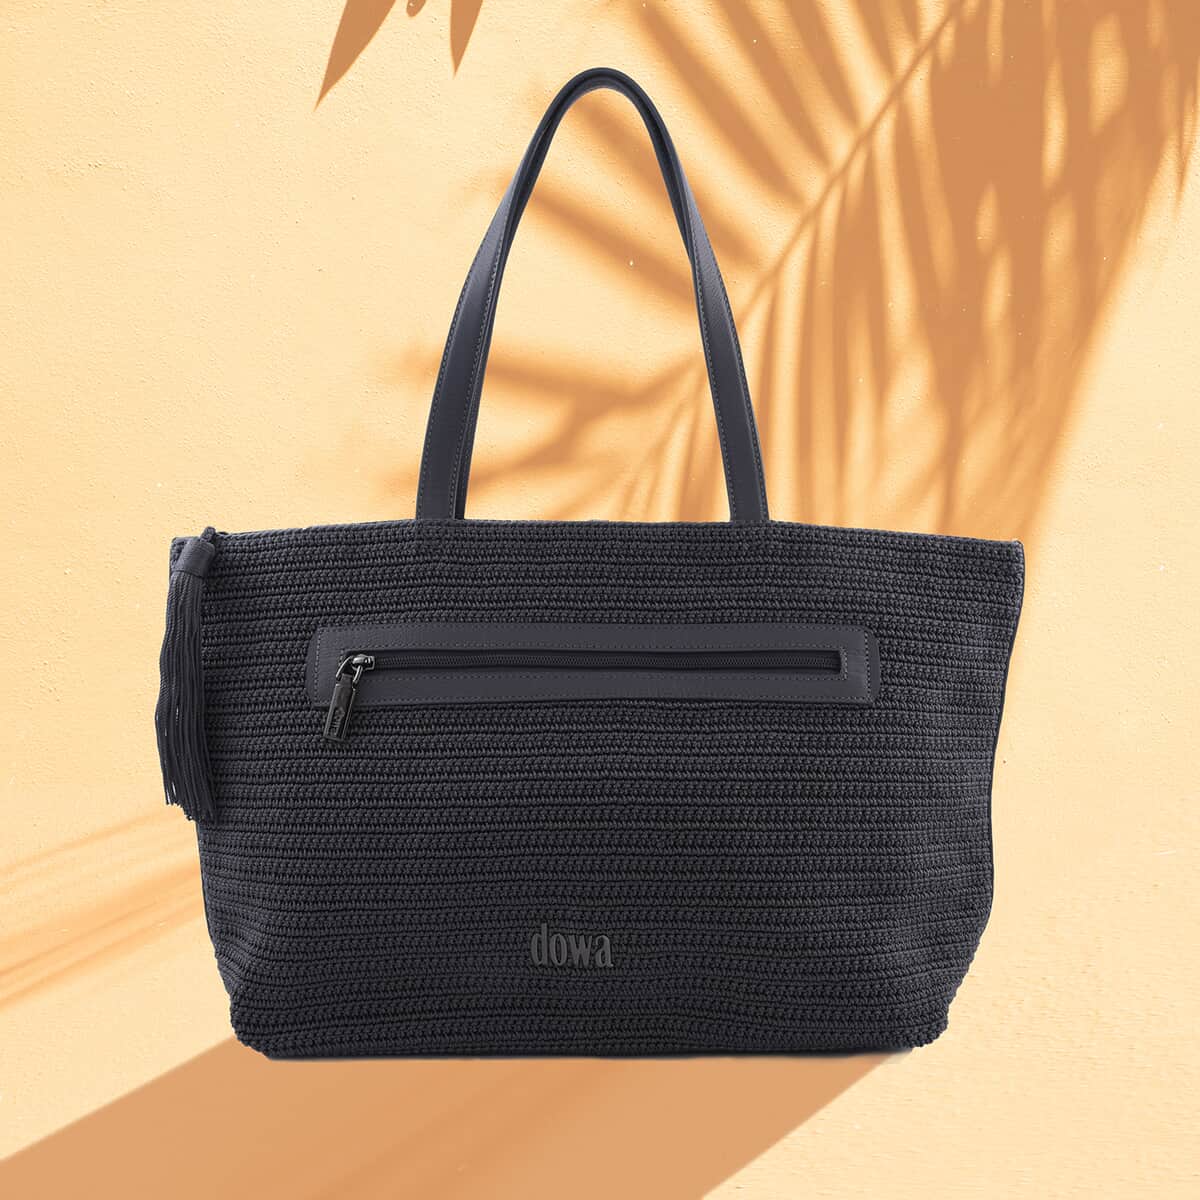 Dowa Gray 100% Nylon with Leather Handwoven Tote Bag image number 1